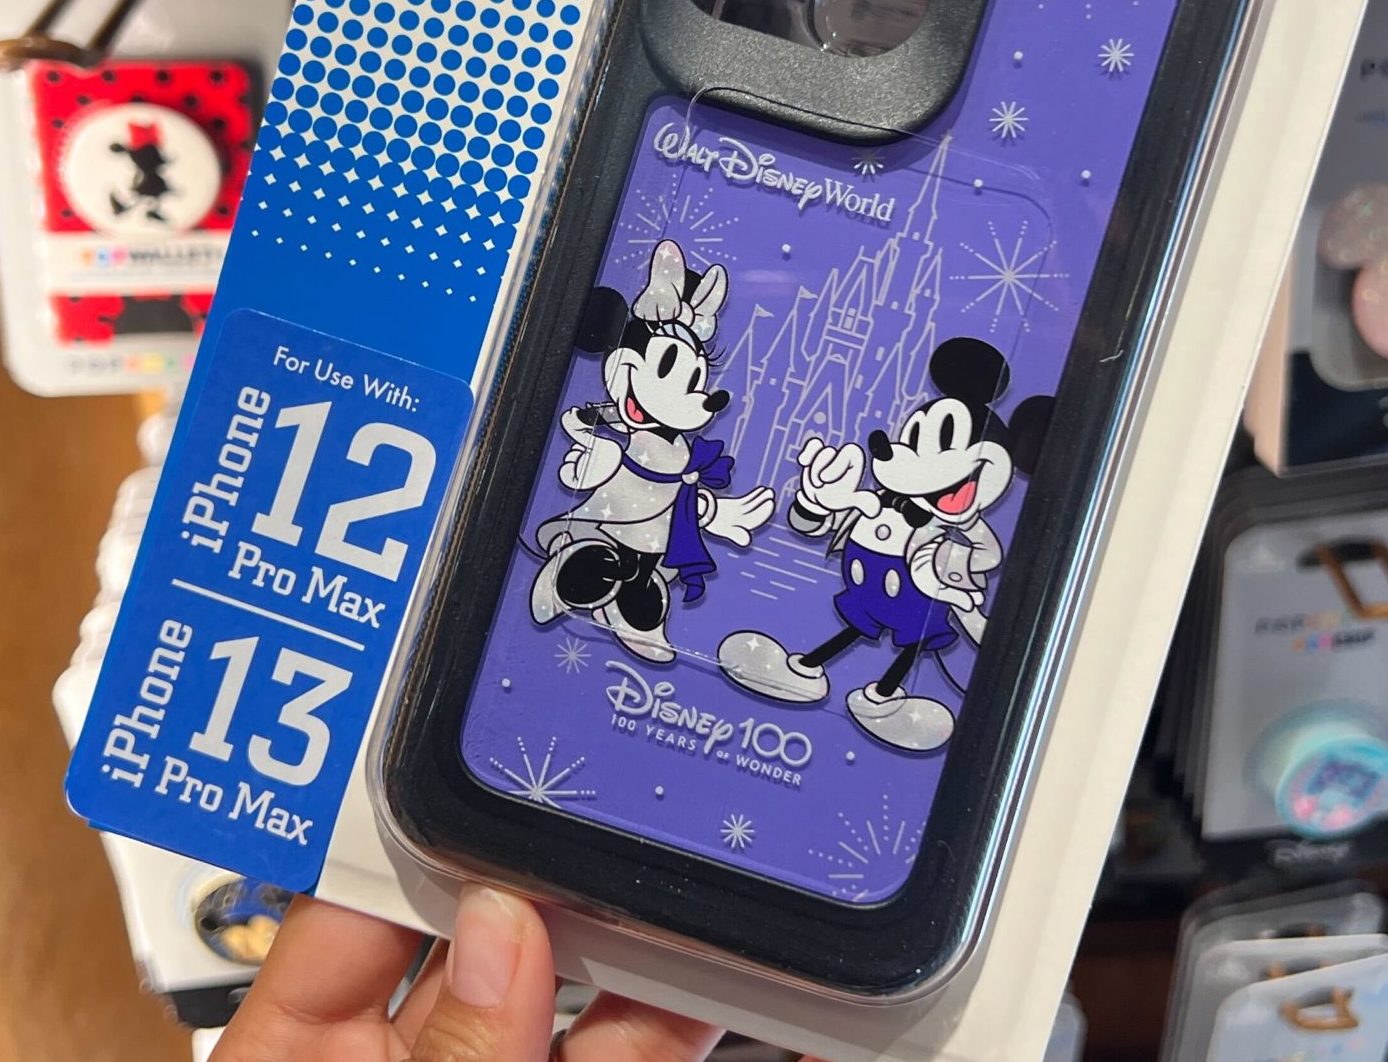 DISNEY PARKS Minnie Mouse 100th Anniversary iPhone XR / iPhone 11 Cover